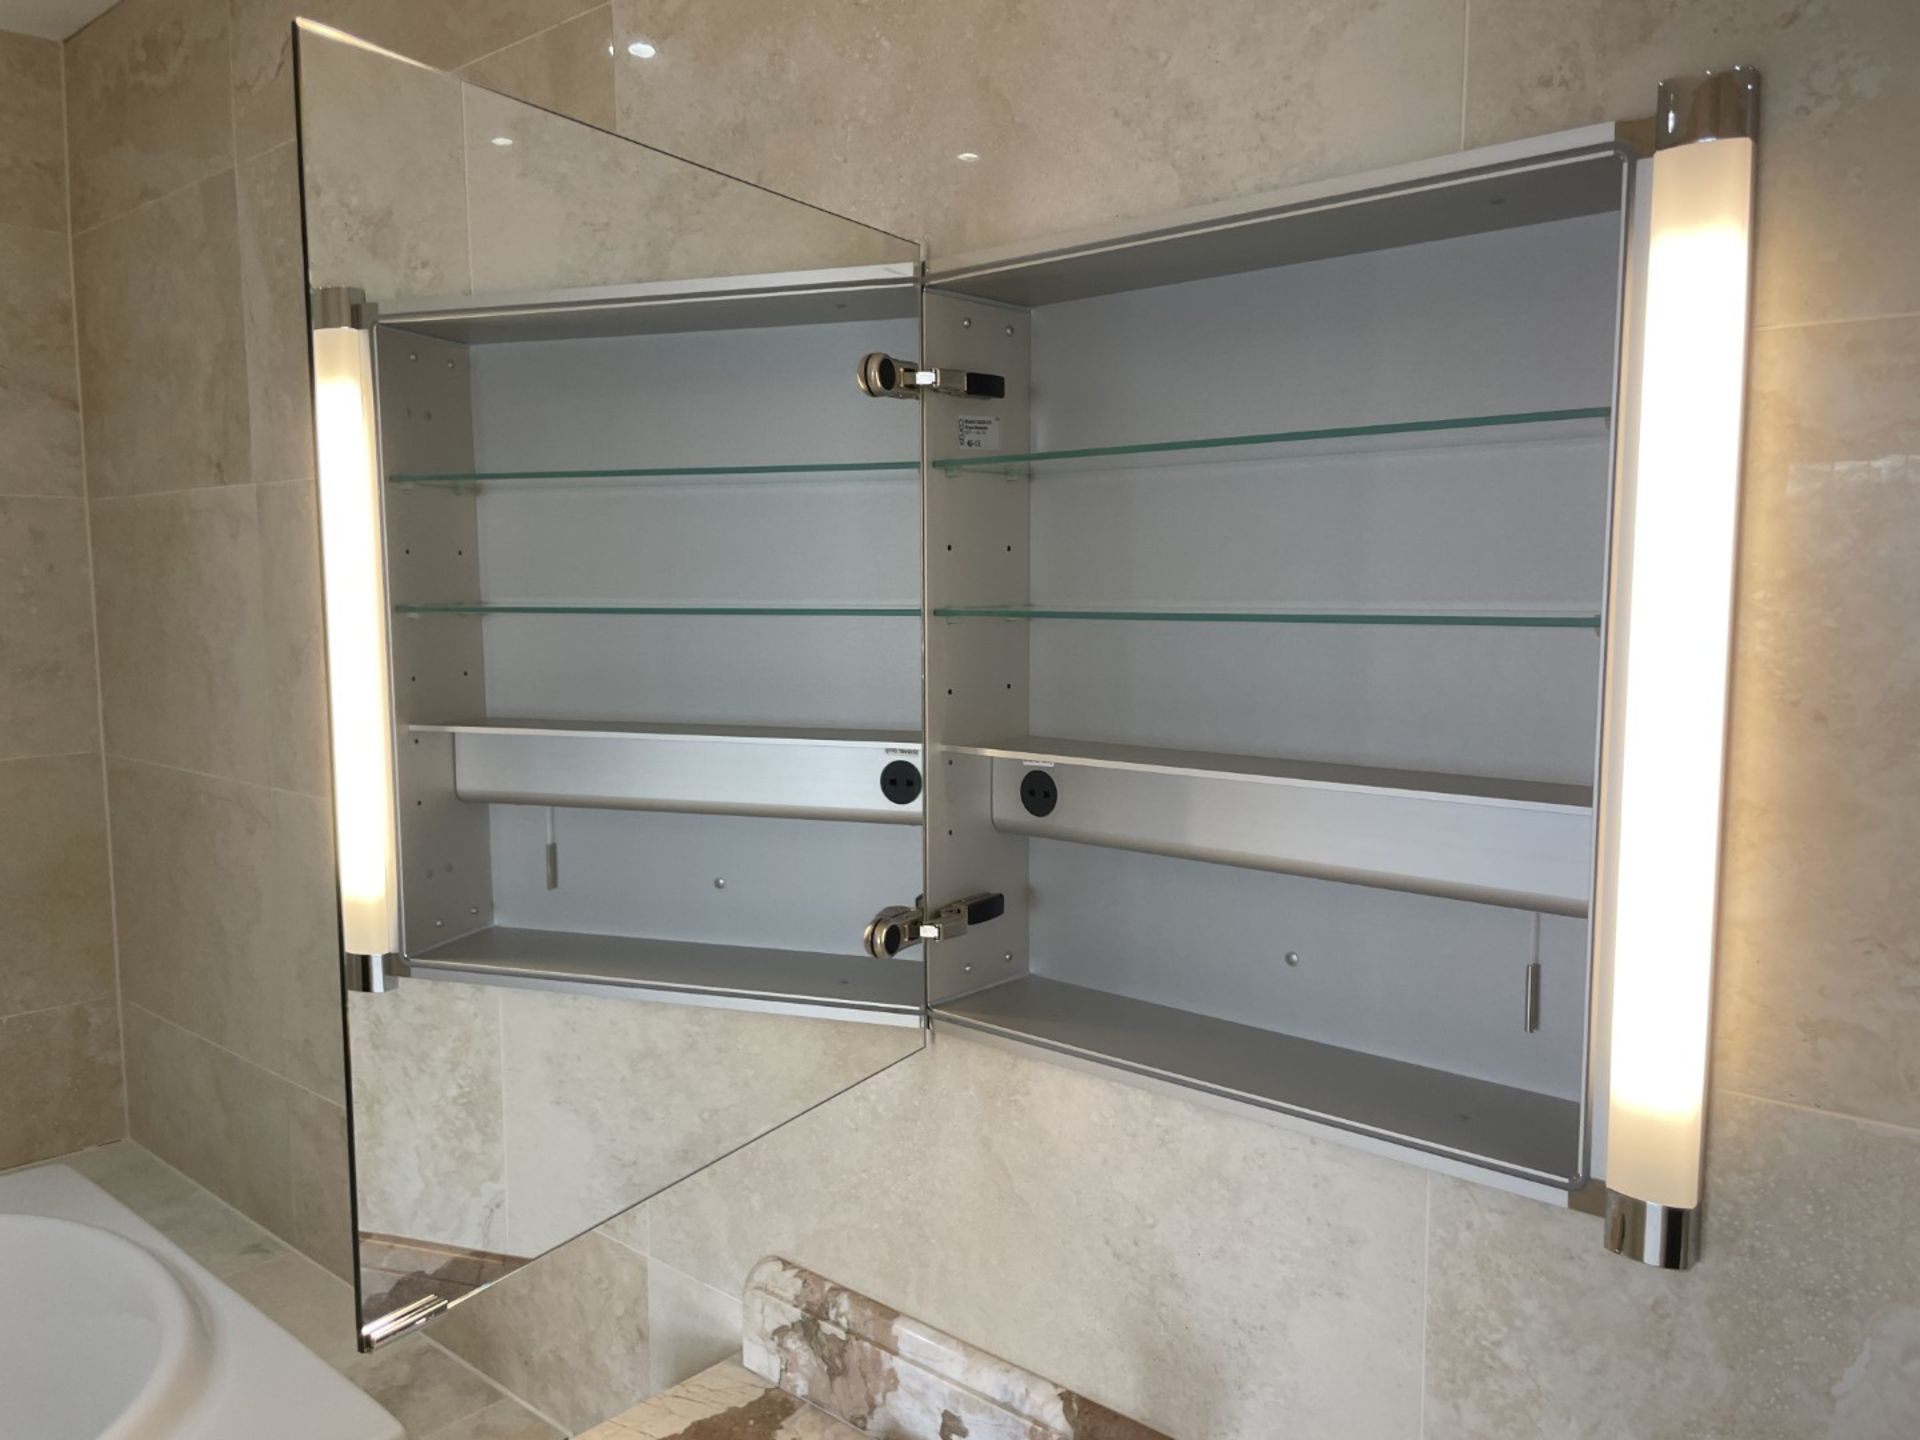 2 x KEUCO Illuminated Mirrored Wall Mounted Cabinets - Total Original Value: £2,000 - Ref: - Image 13 of 19